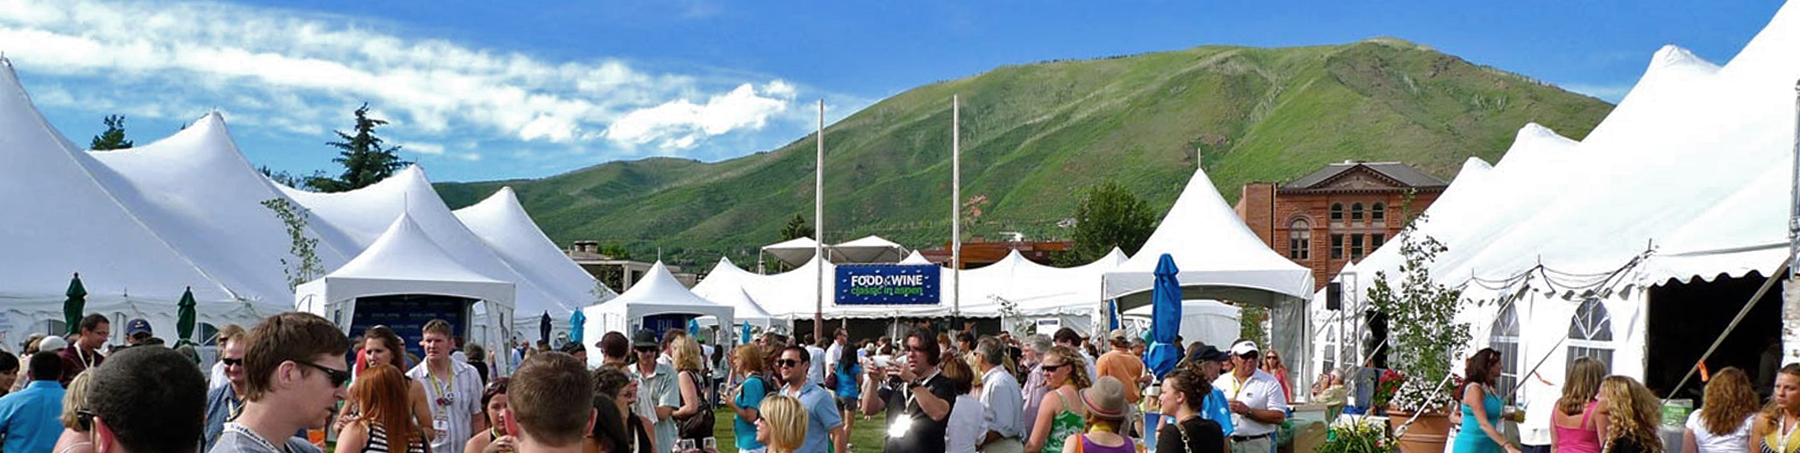 Food and Wine is another Aspen premier event right down the street from the Tyrolean Lodge